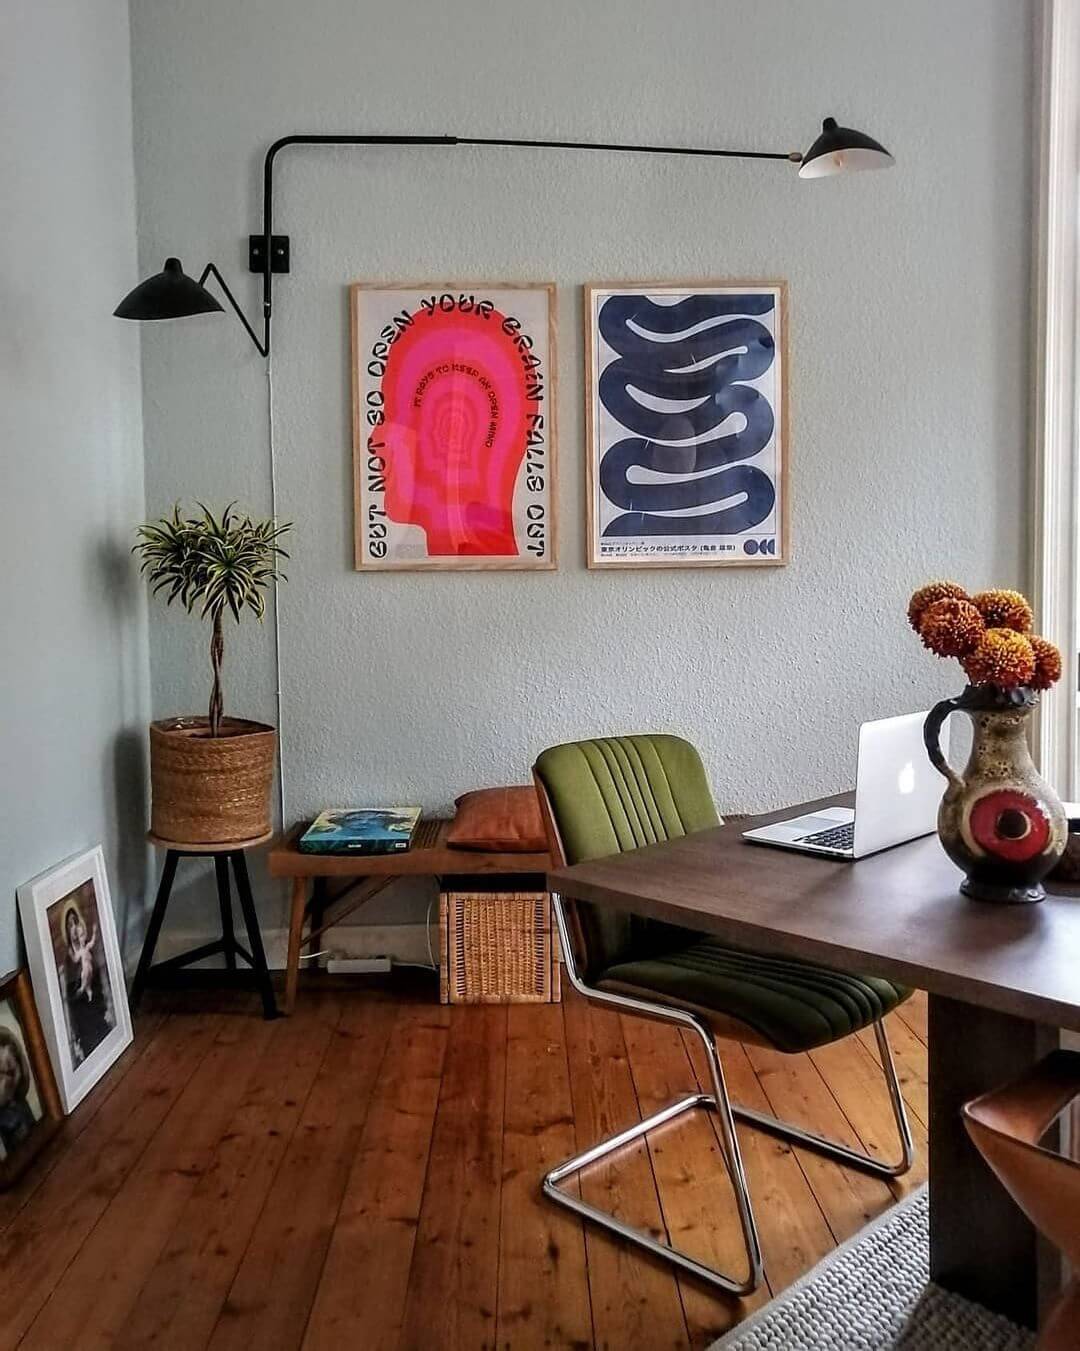 mid century modern interior with exposed wood flooring an arc wall lamp, vintage green chair and 2 framed contemporary art prints